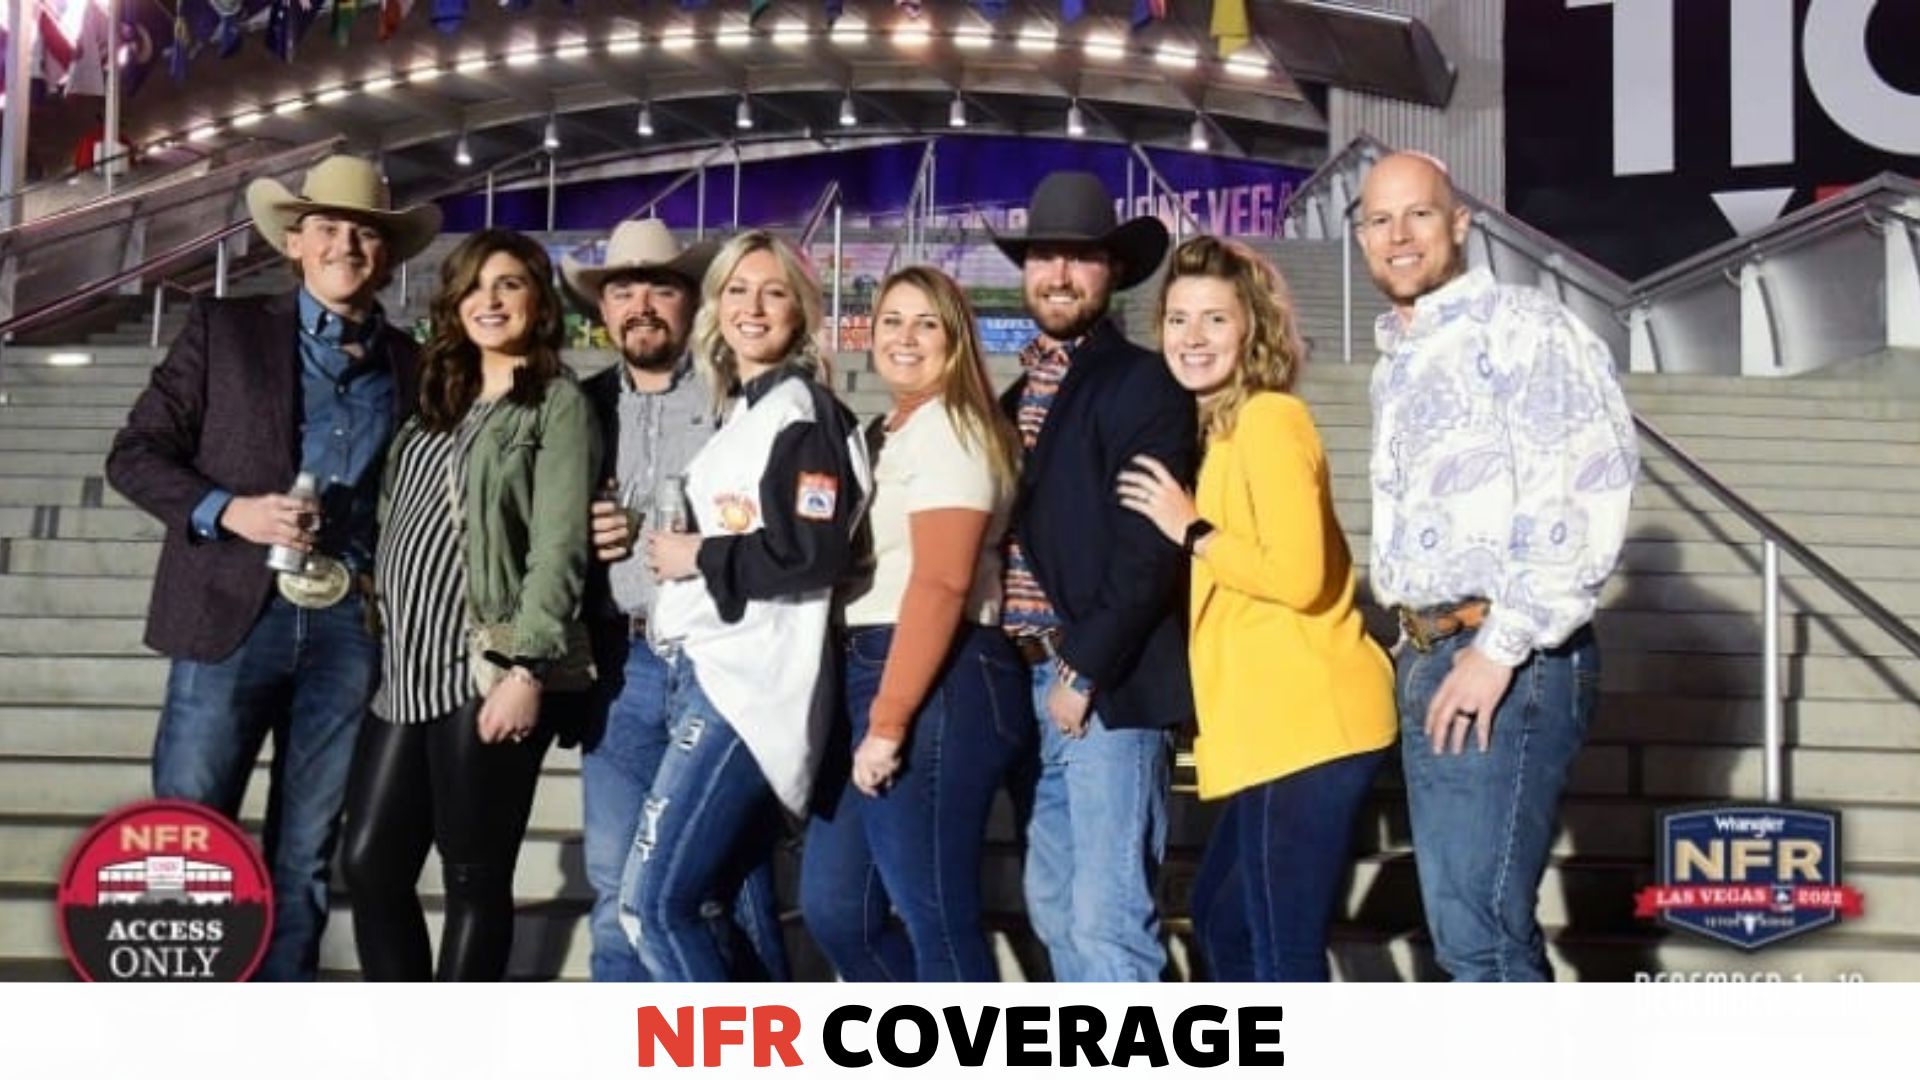 NFR Ticket Deals: How to Save Big on Your Next Rodeo Experience